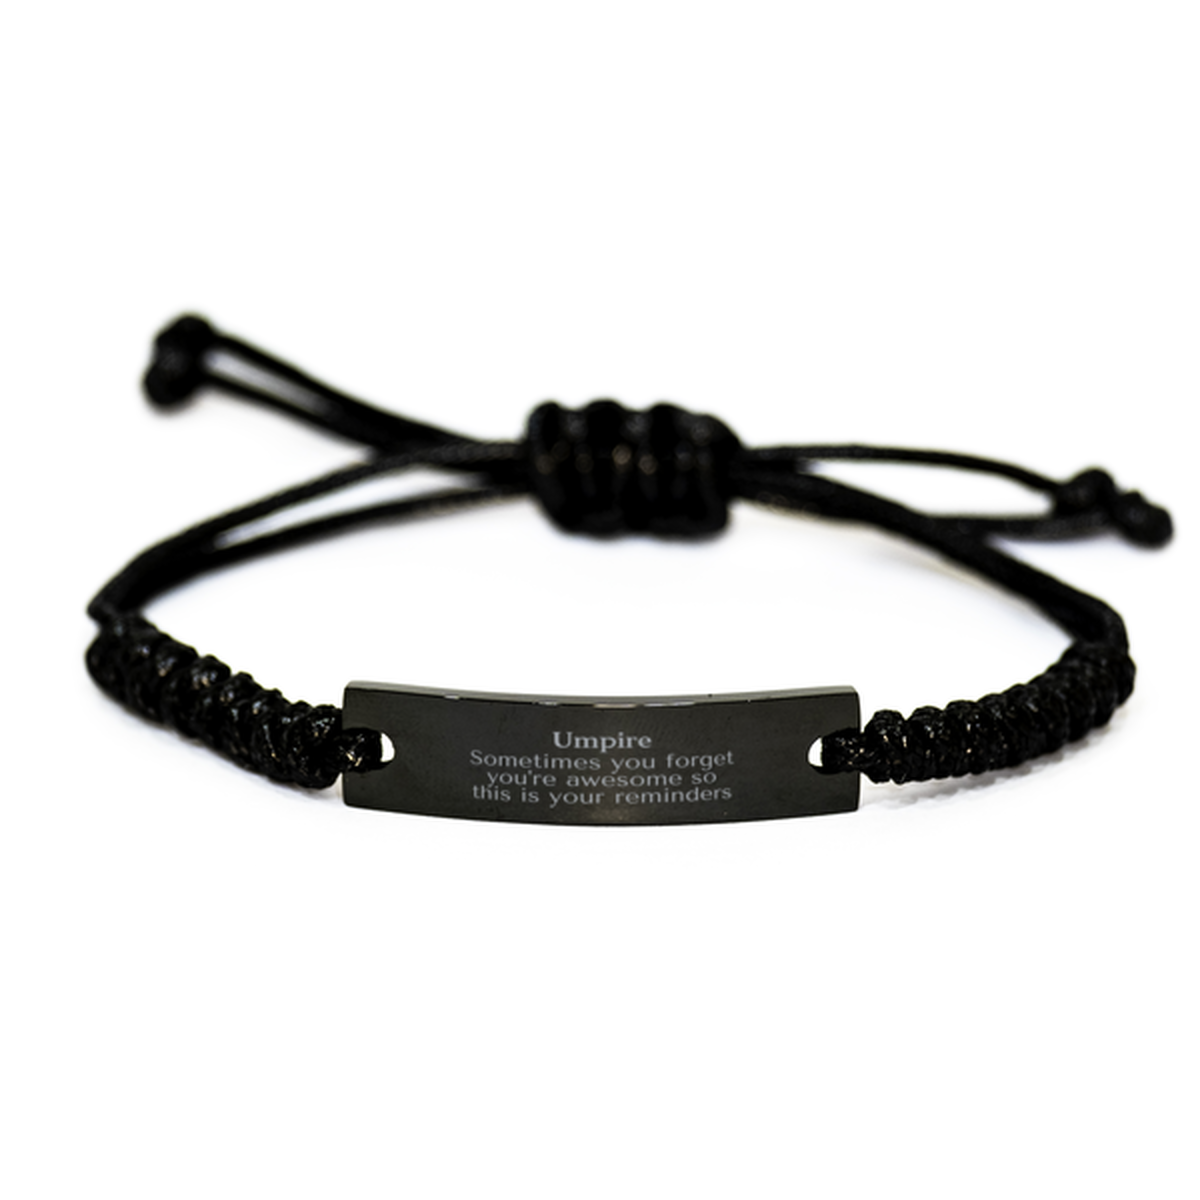 Sentimental Umpire Black Rope Bracelet, Umpire Sometimes you forget you're awesome so this is your reminders, Graduation Christmas Birthday Gifts for Umpire, Men, Women, Coworkers